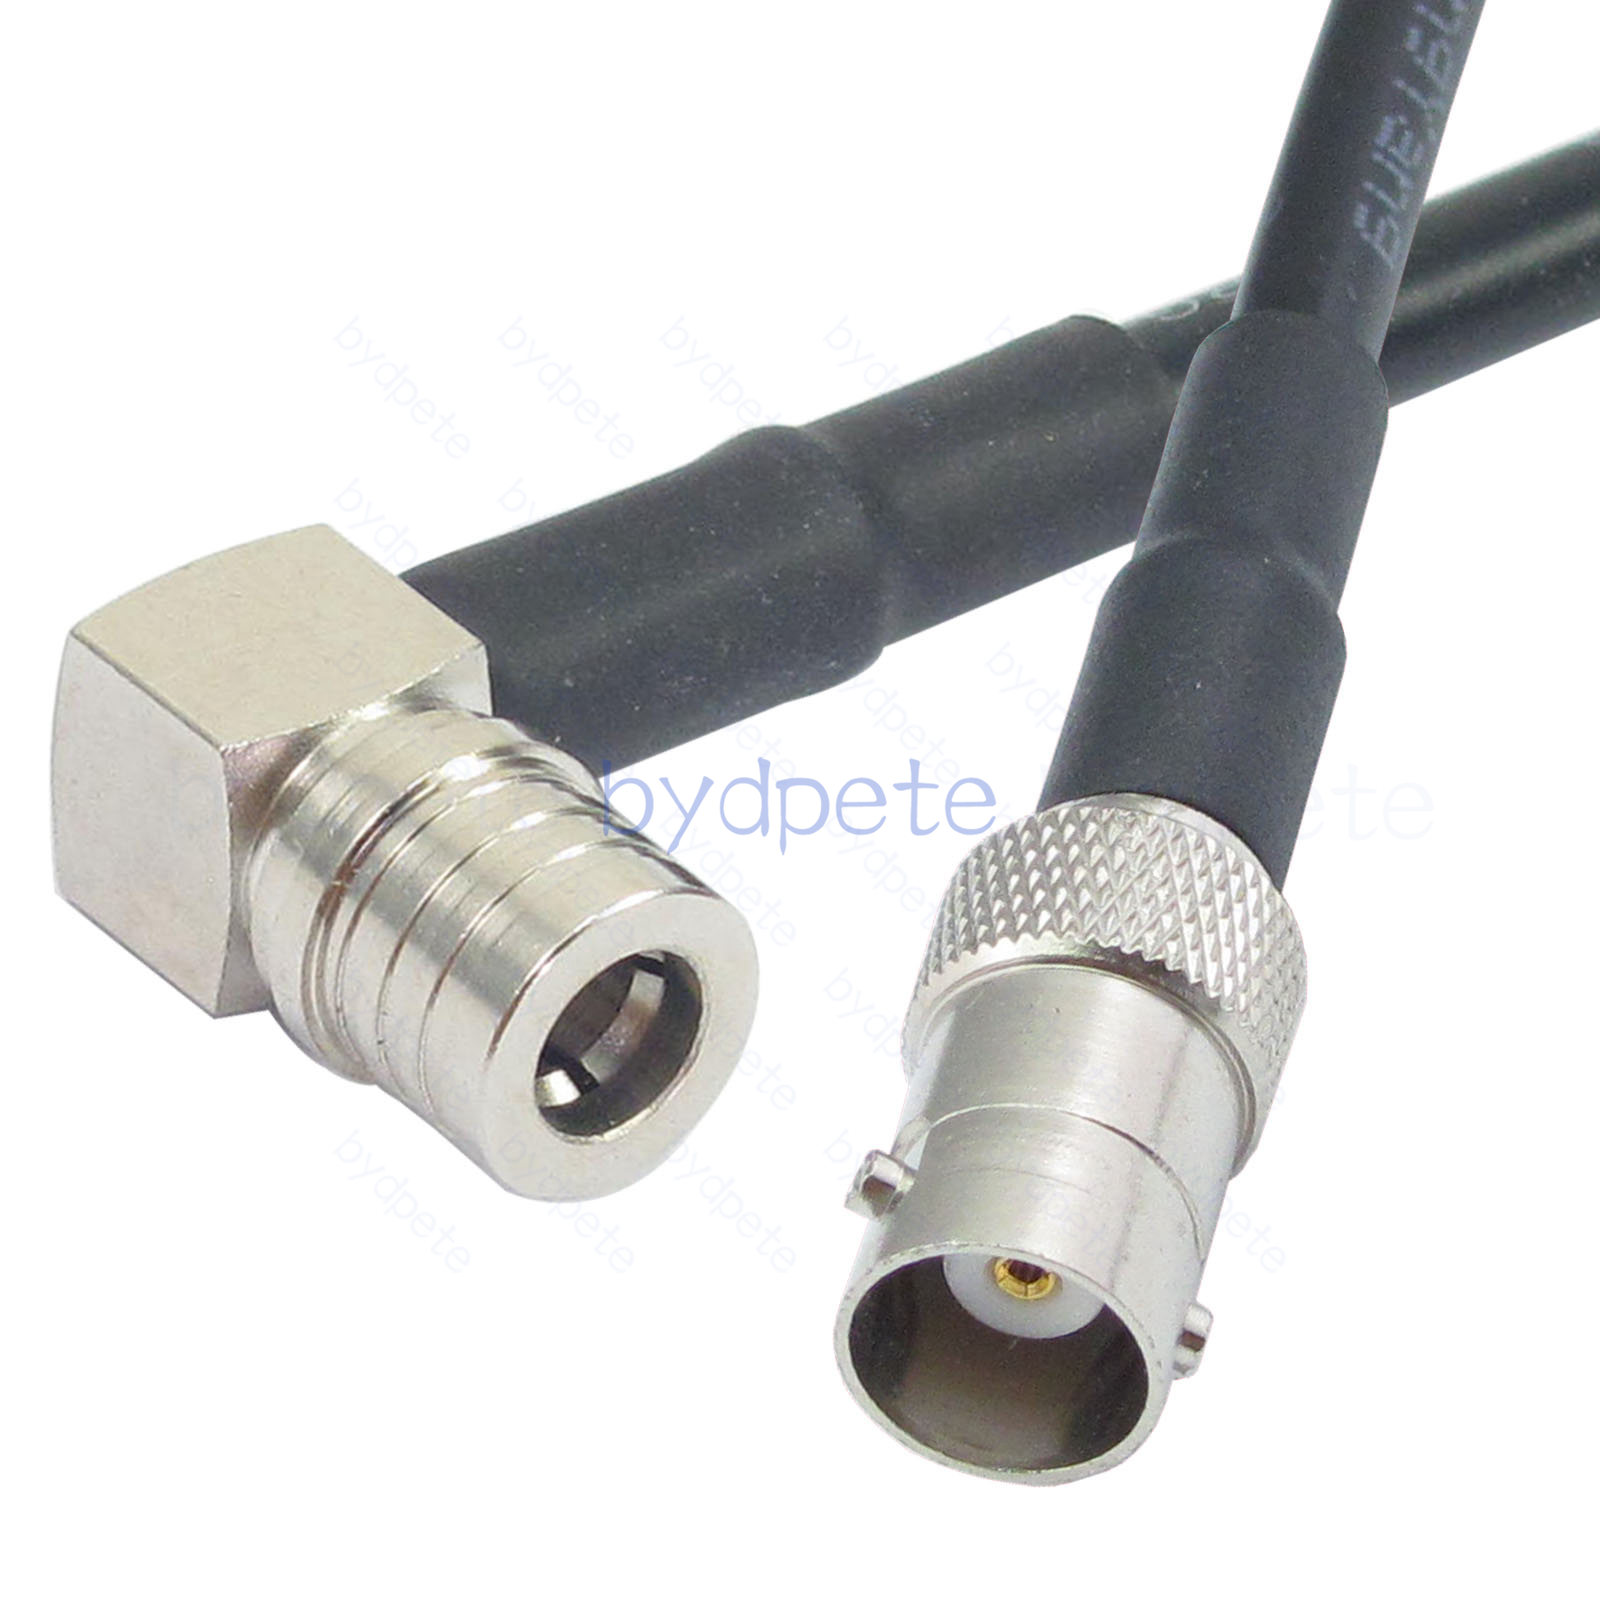 RG58 Cable QMA Male right angle 90degree Plug Connector to BNC Female Small RF Coax Coaxial Any length Lot bydpete BYDC514QMAMR1S258